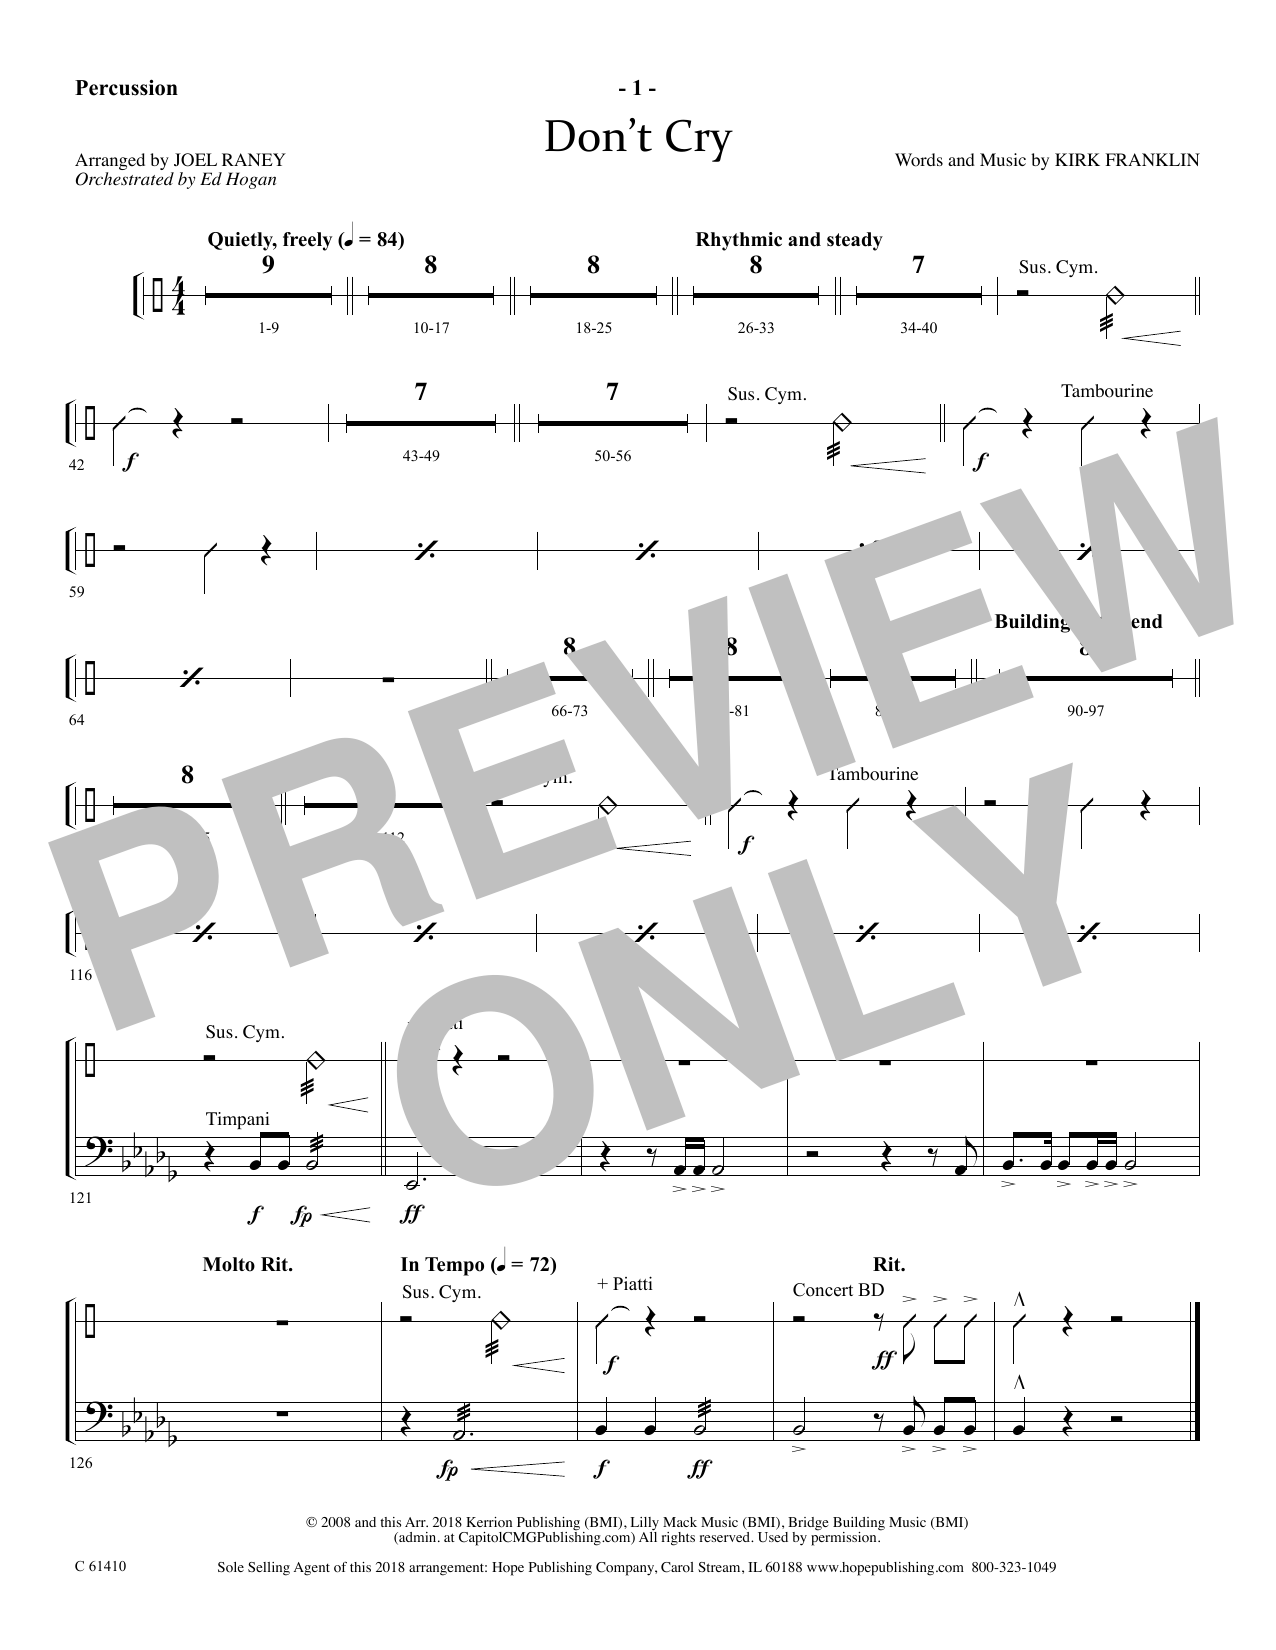 Download Joel Raney Don't Cry - Percussion Sheet Music